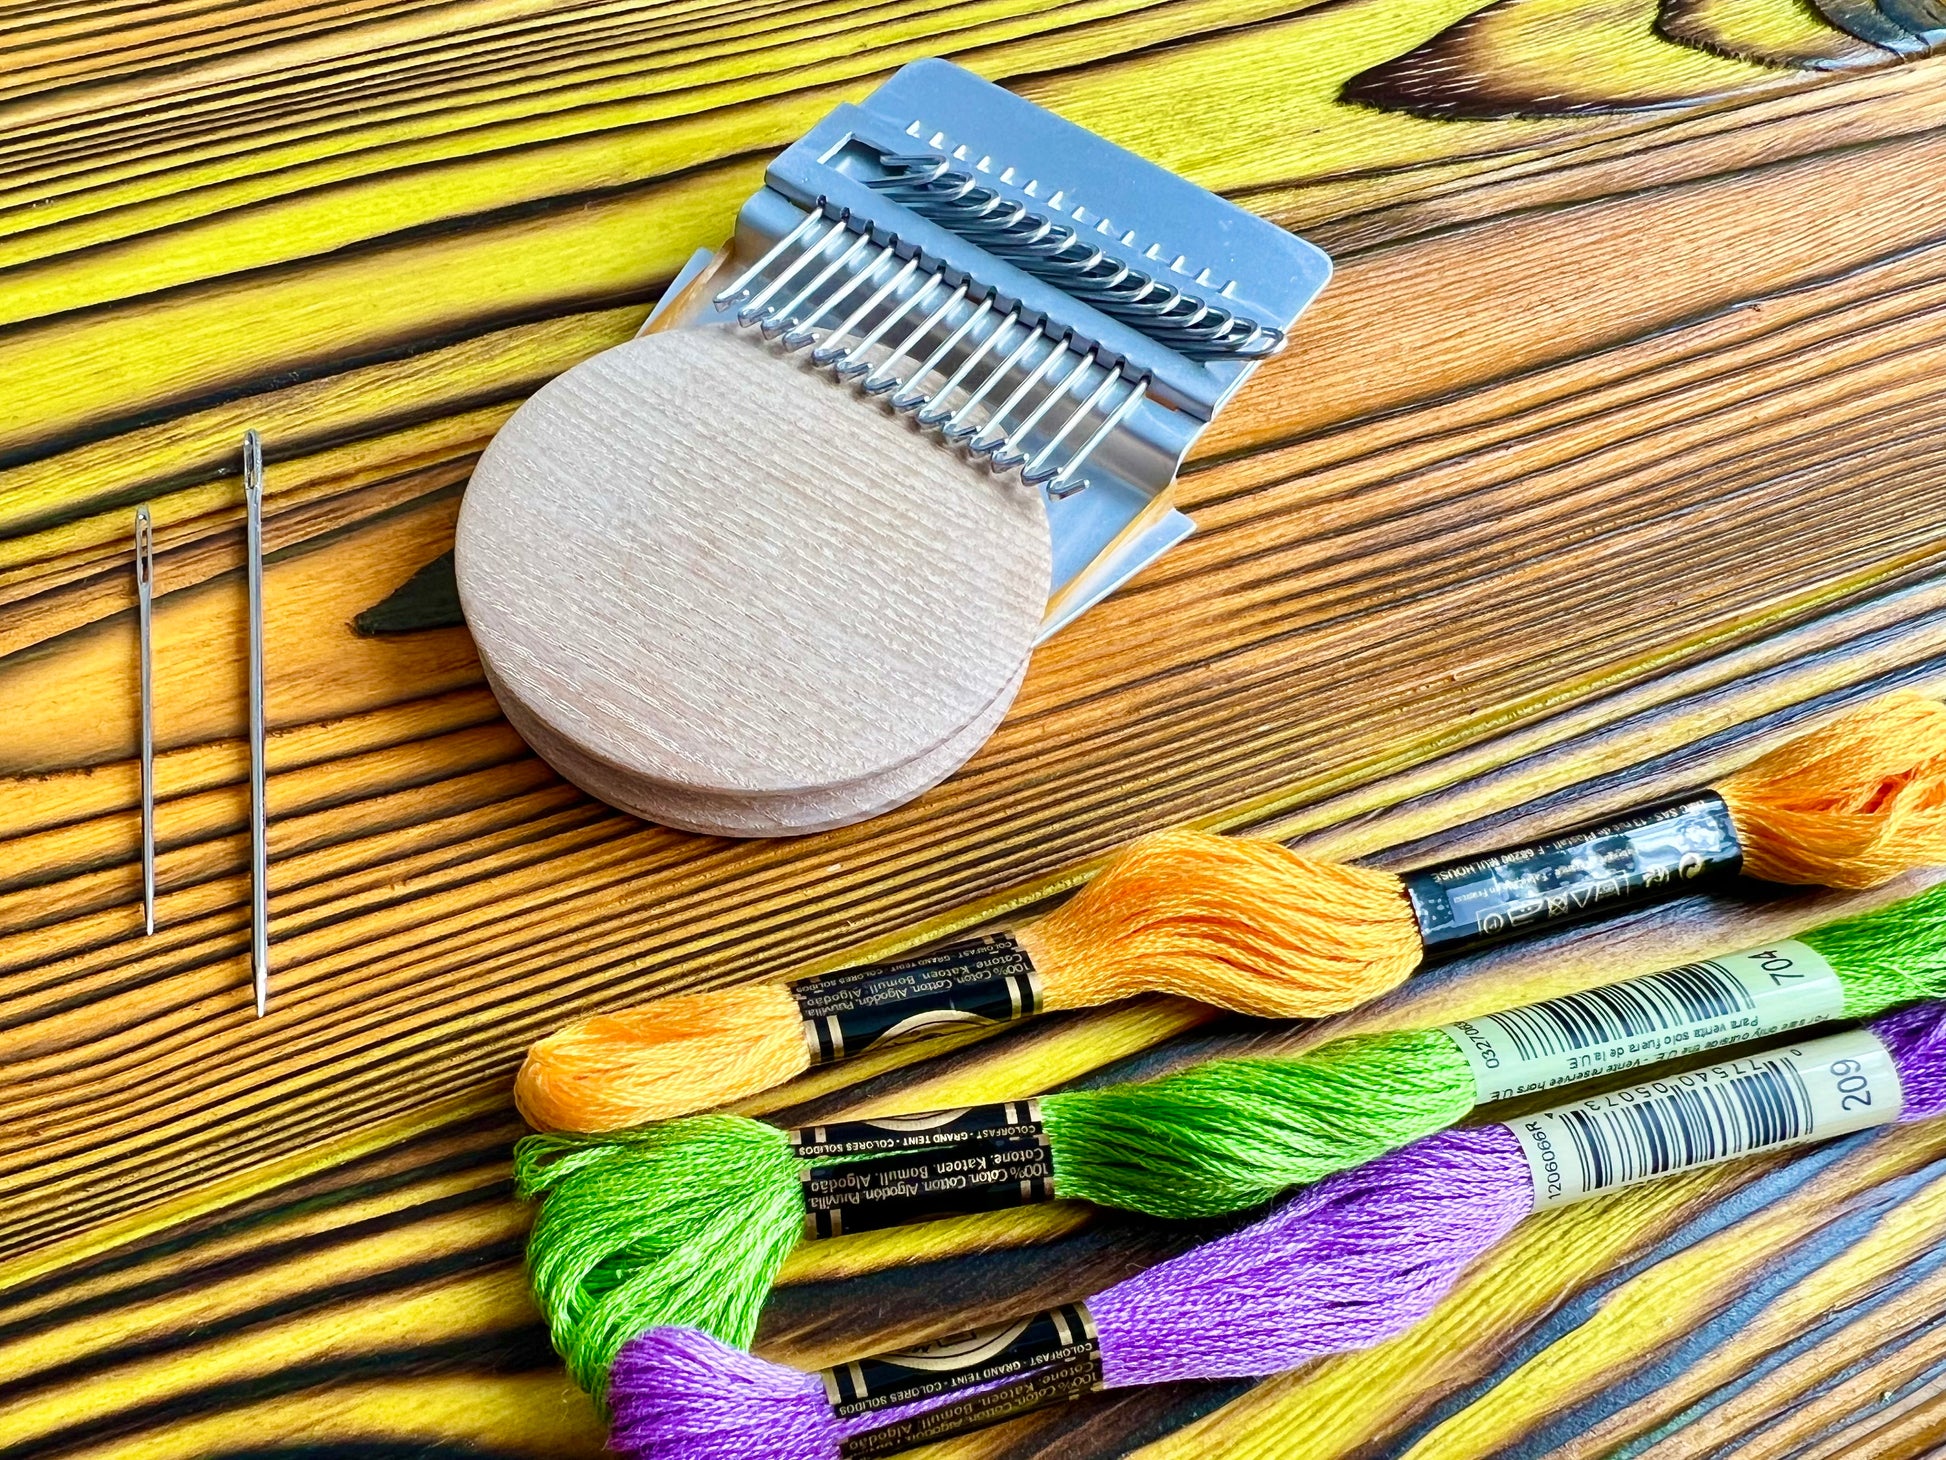 Darning loom, Speedweve type, Rapid darner, Mom hobie, with a set of  needles and yarns